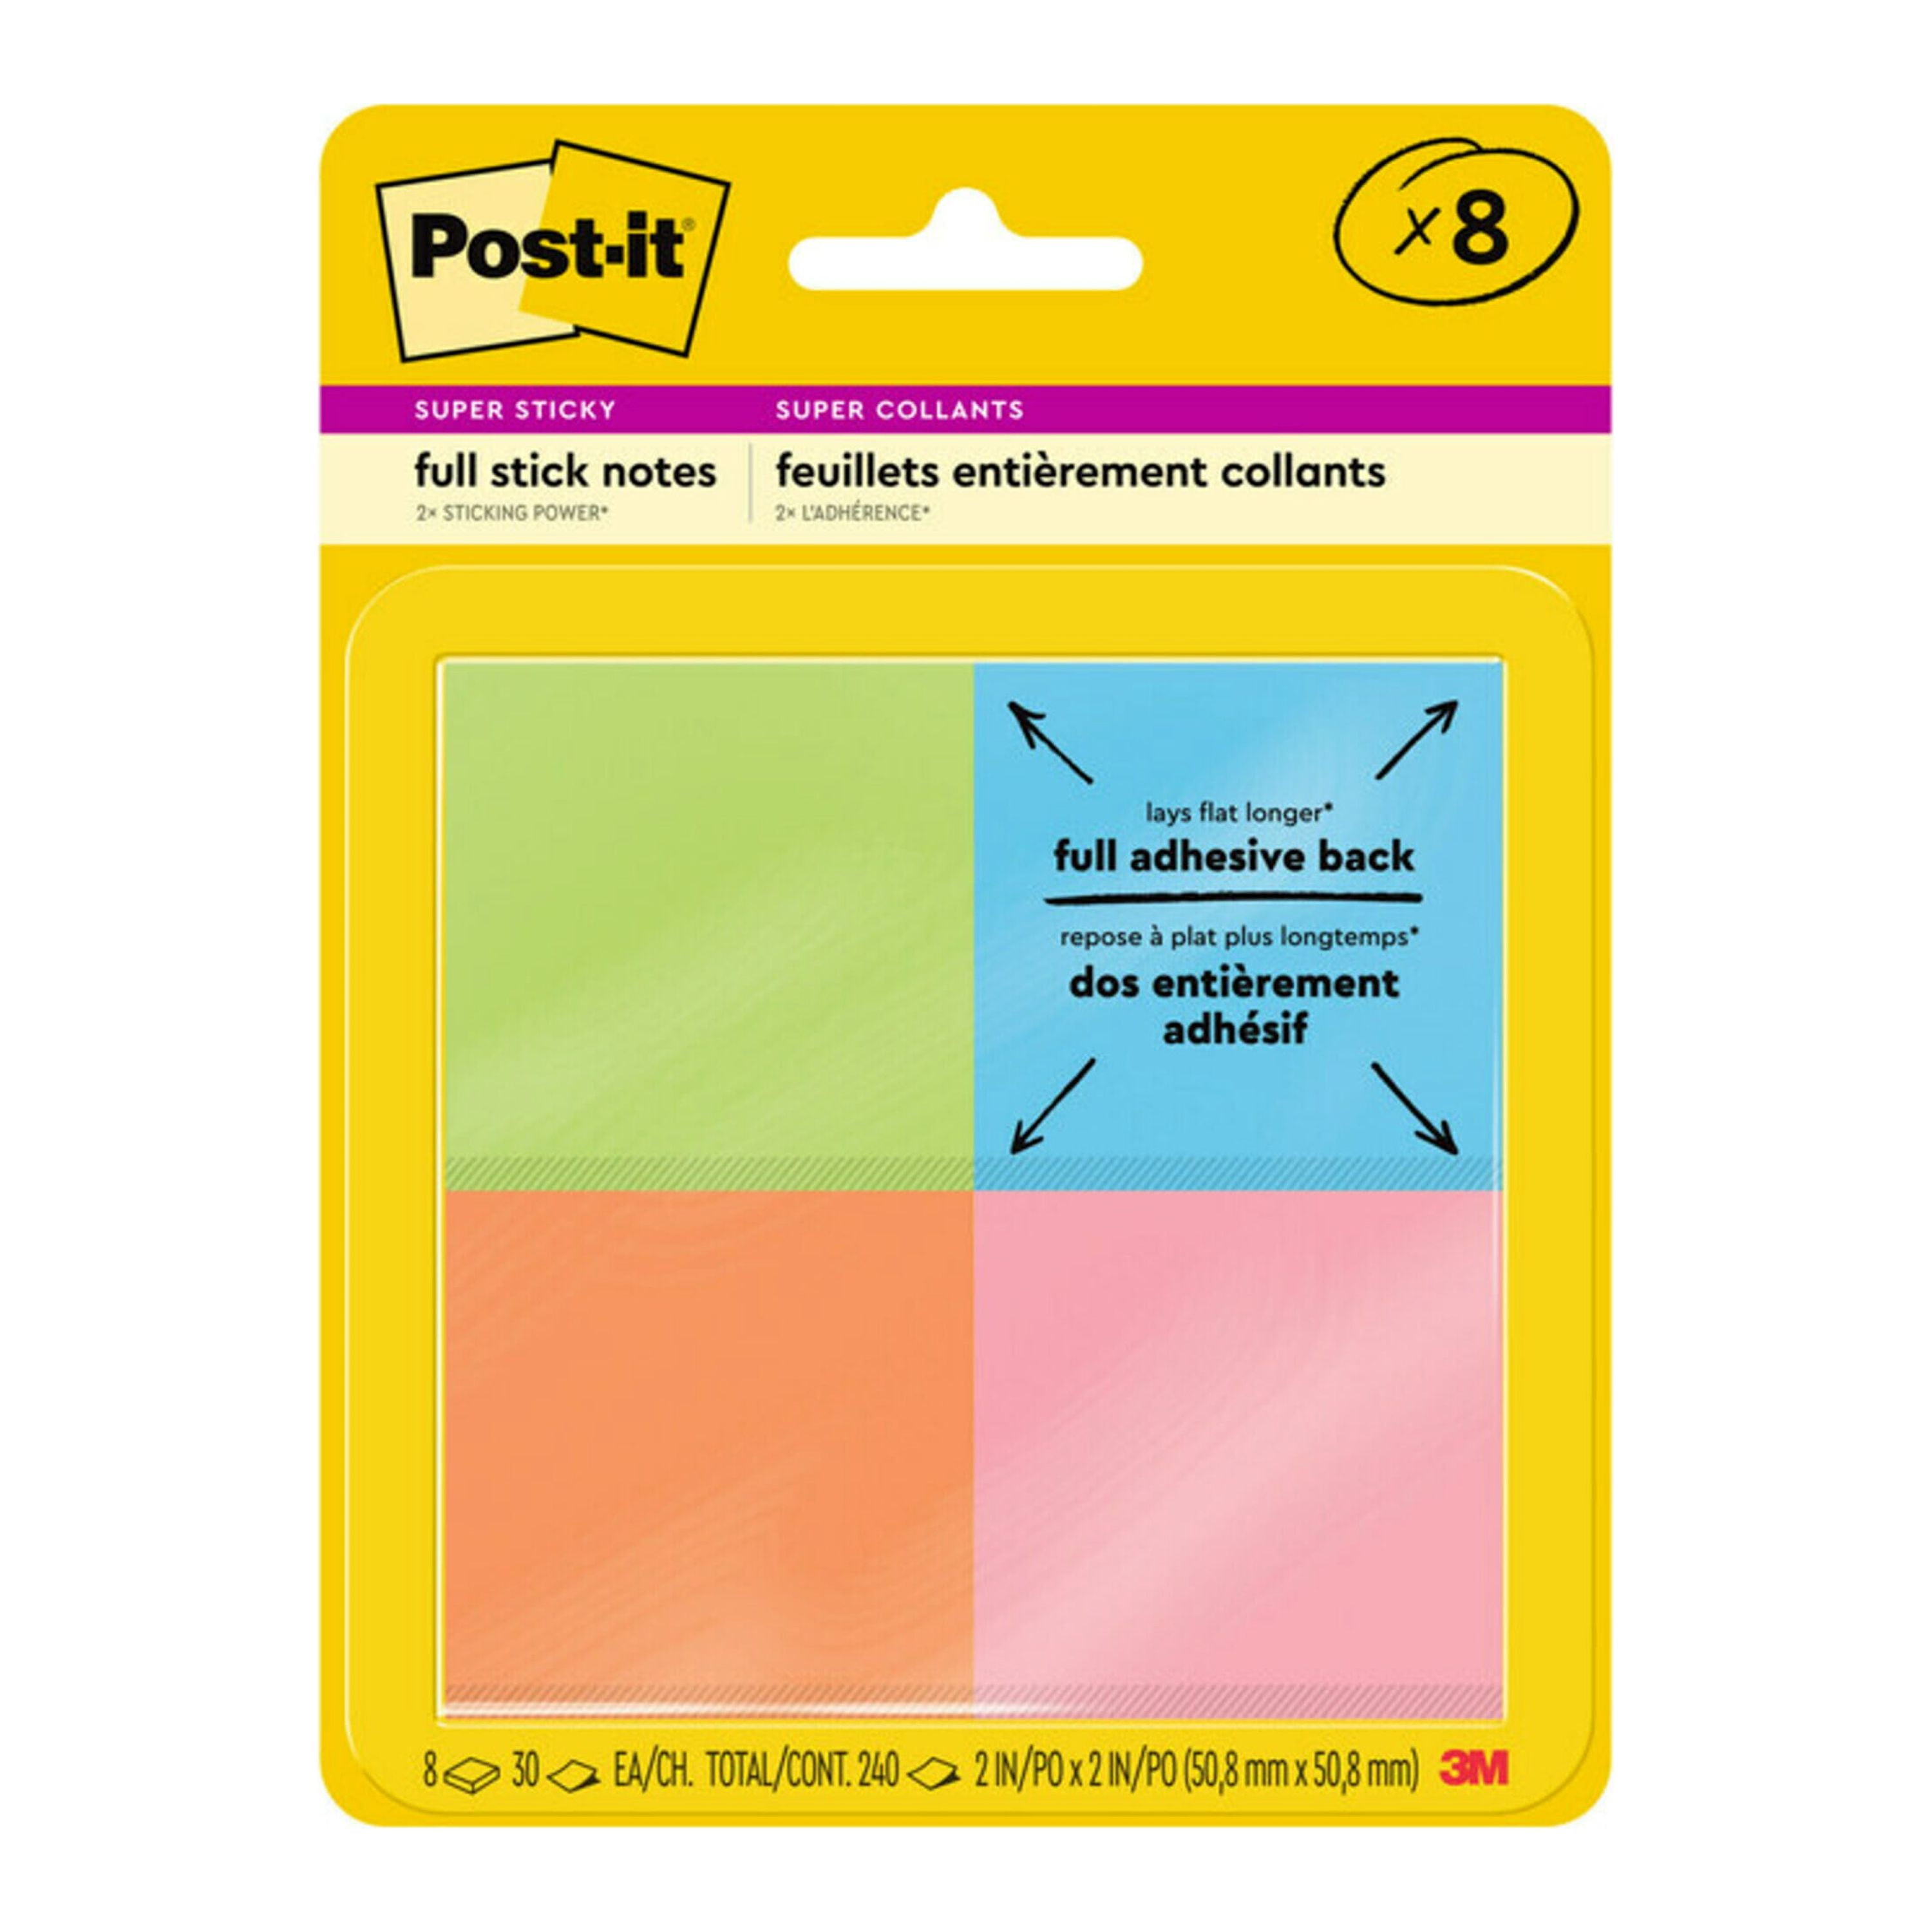  Post-it Notes, Star Shape, Yellow and Pink with pattern, 2.9  in x 2.8 in, 2 Pads, 75 Sheets/Pad (7350-STR) : Star Post It : Office  Products